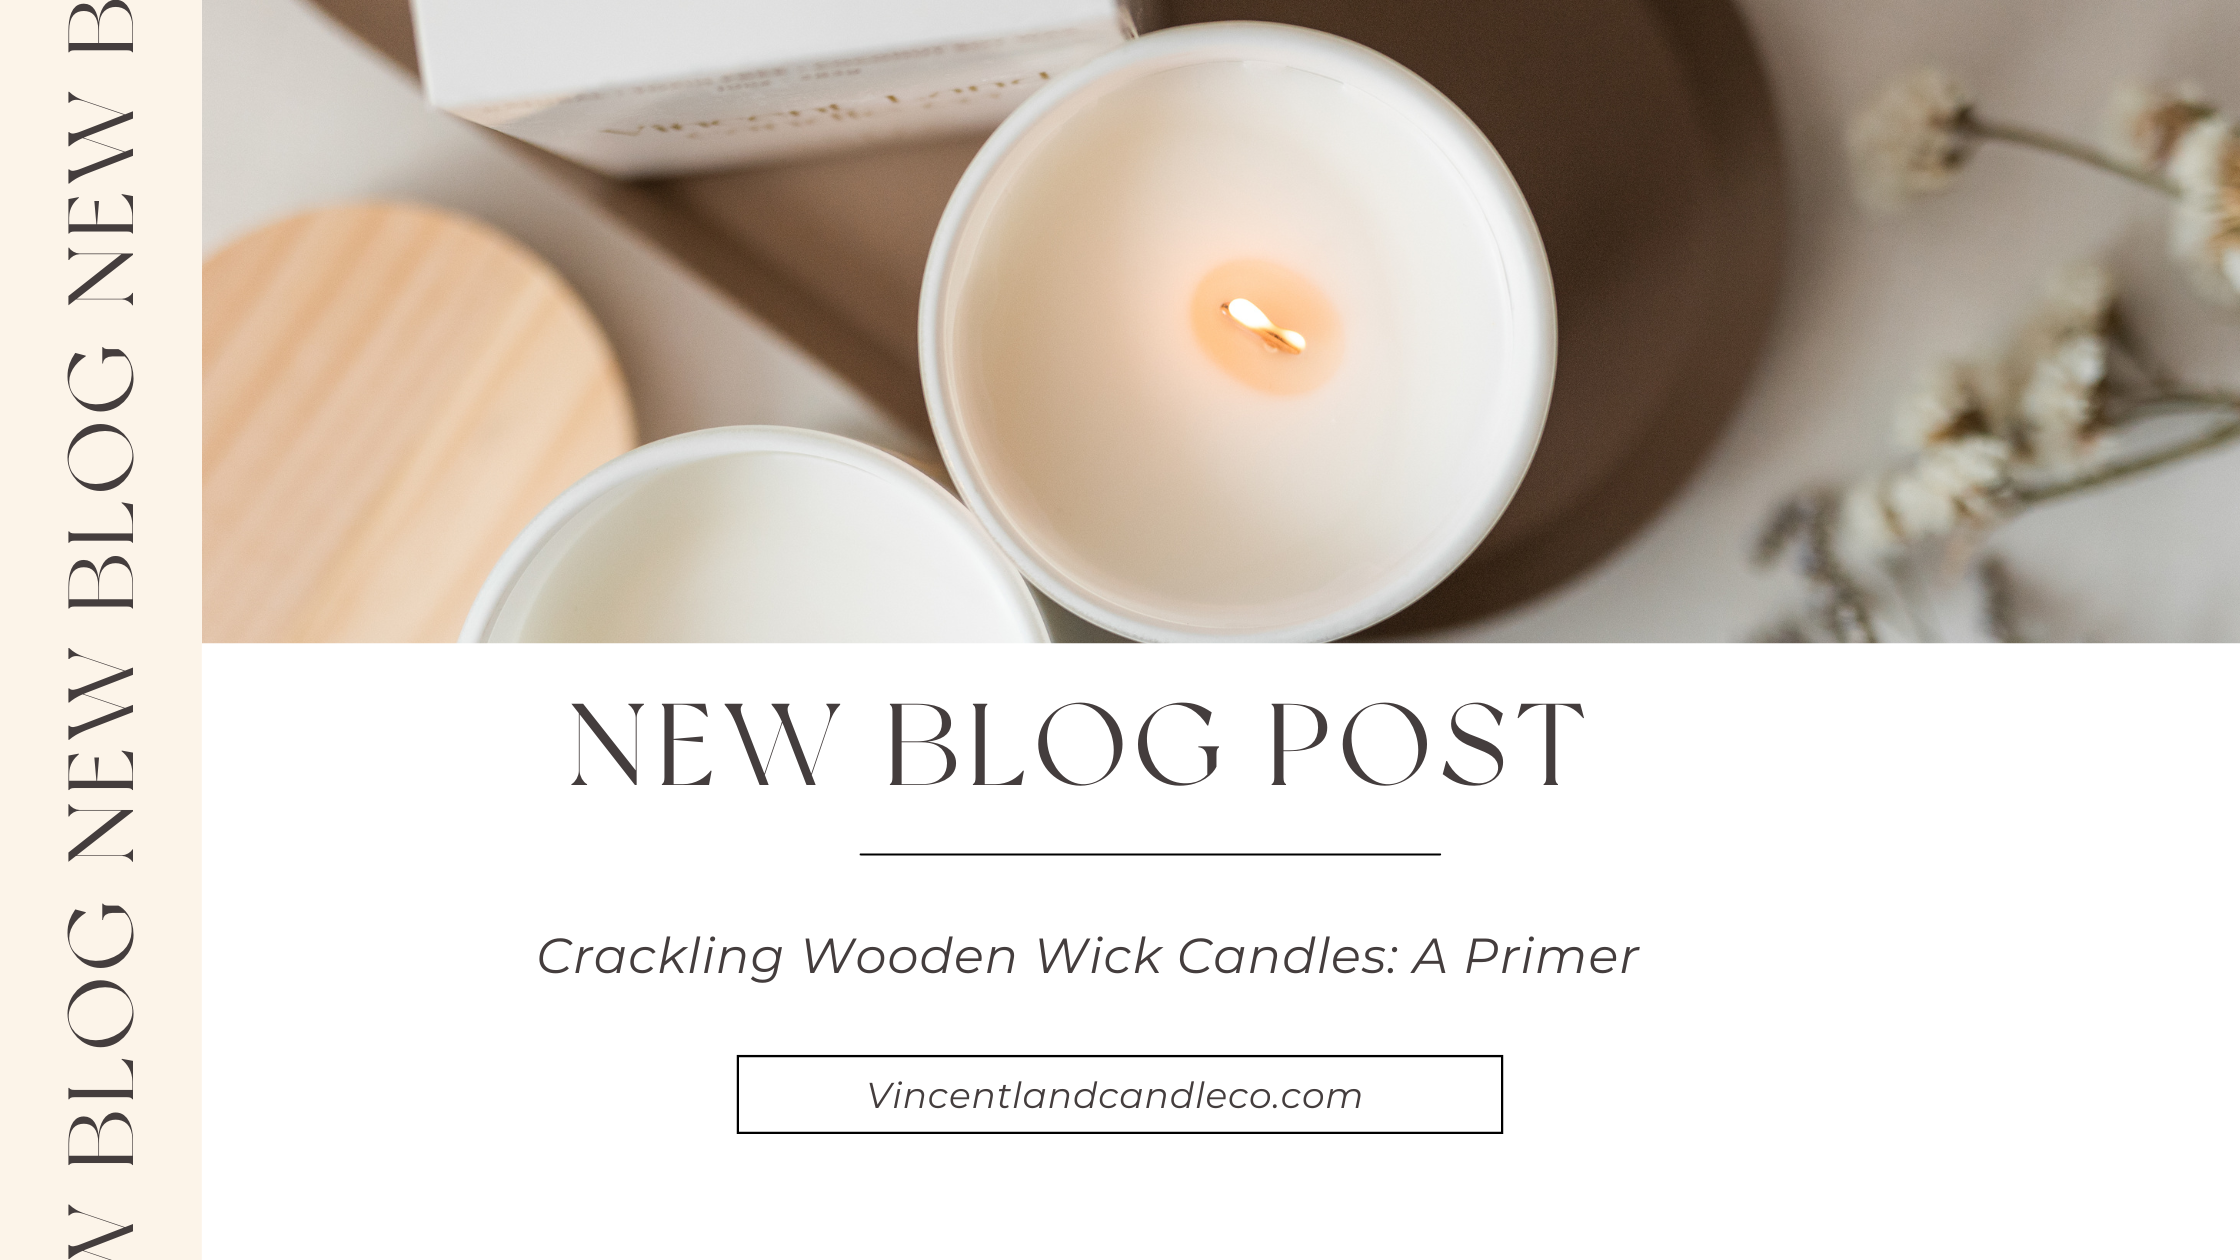 Crackling Wooden Wick Candles: A Primer